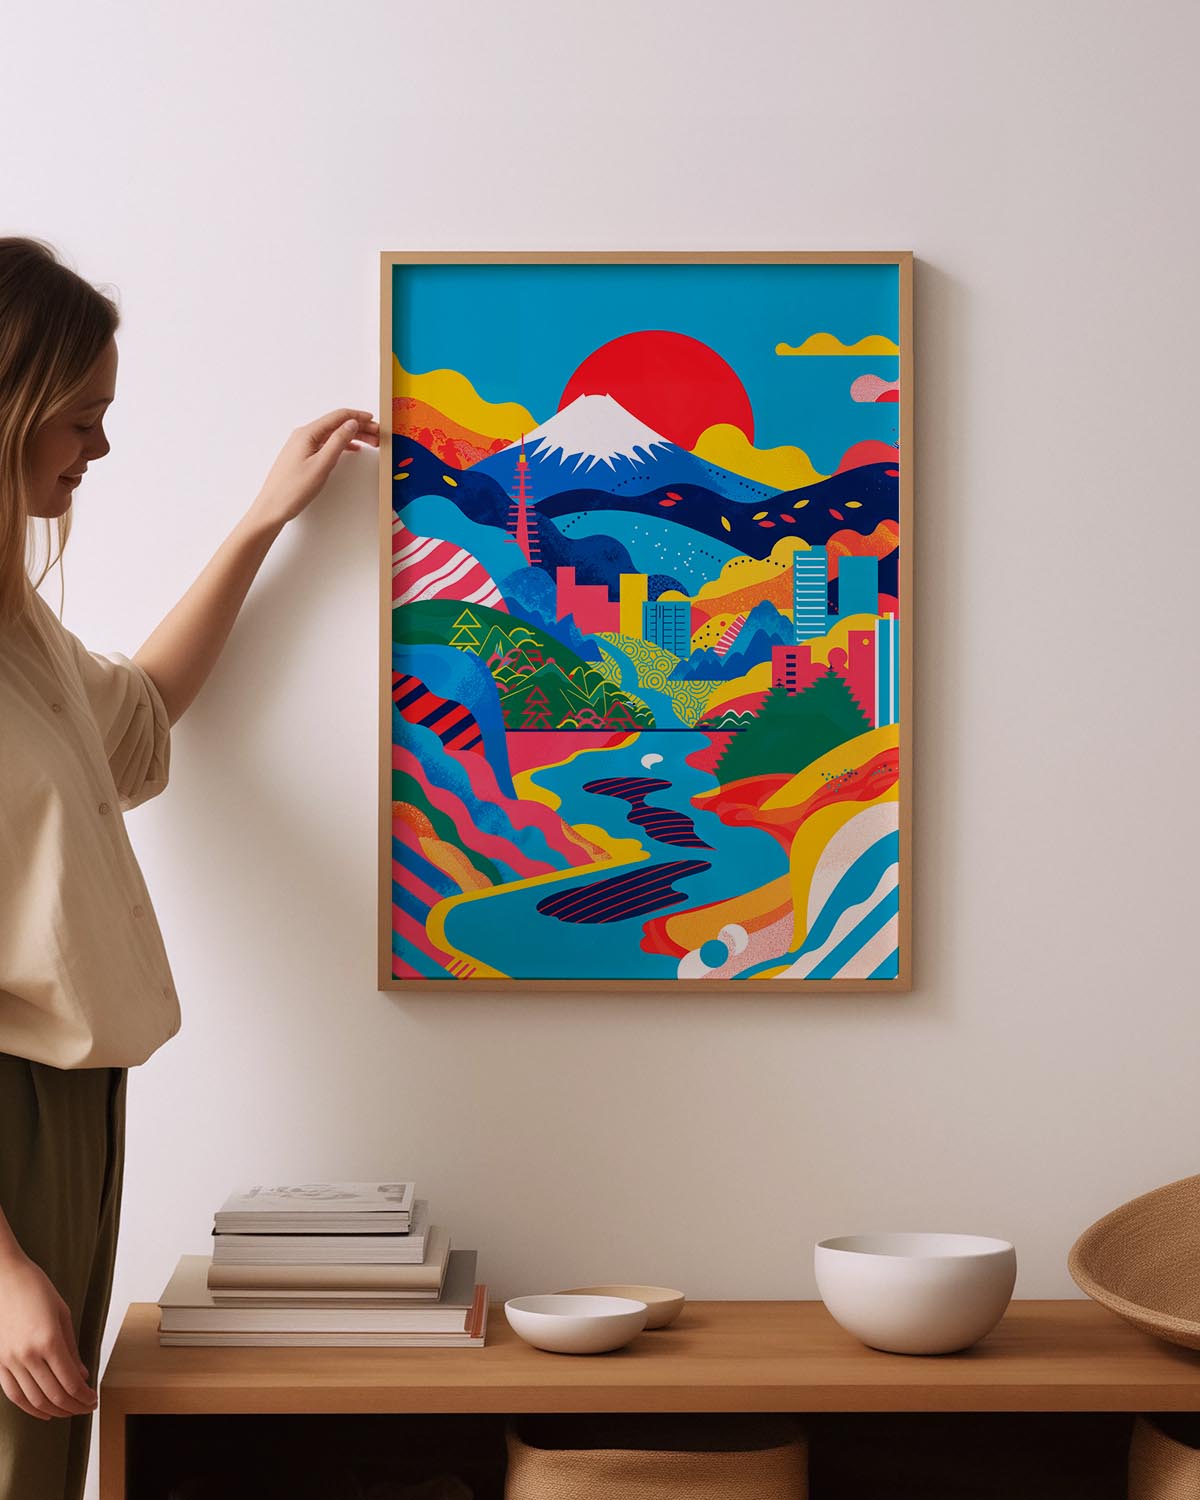 Vibrant abstract poster featuring a modern interpretation of Mount Fuji amidst colorful urban and natural motifs.